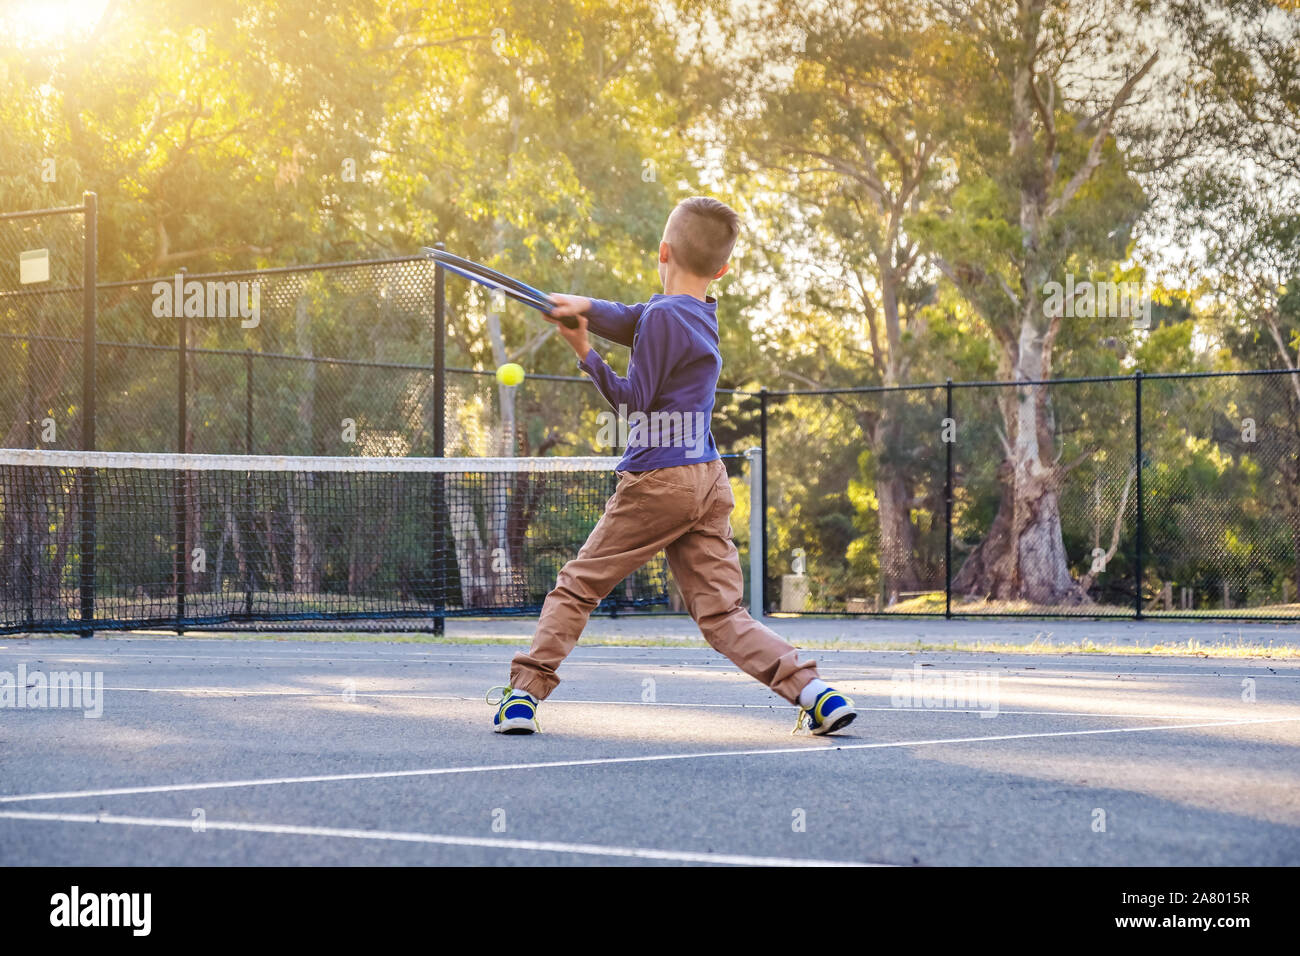 Australian boy playing tennis at outdoor court in South Australia Stock Photo